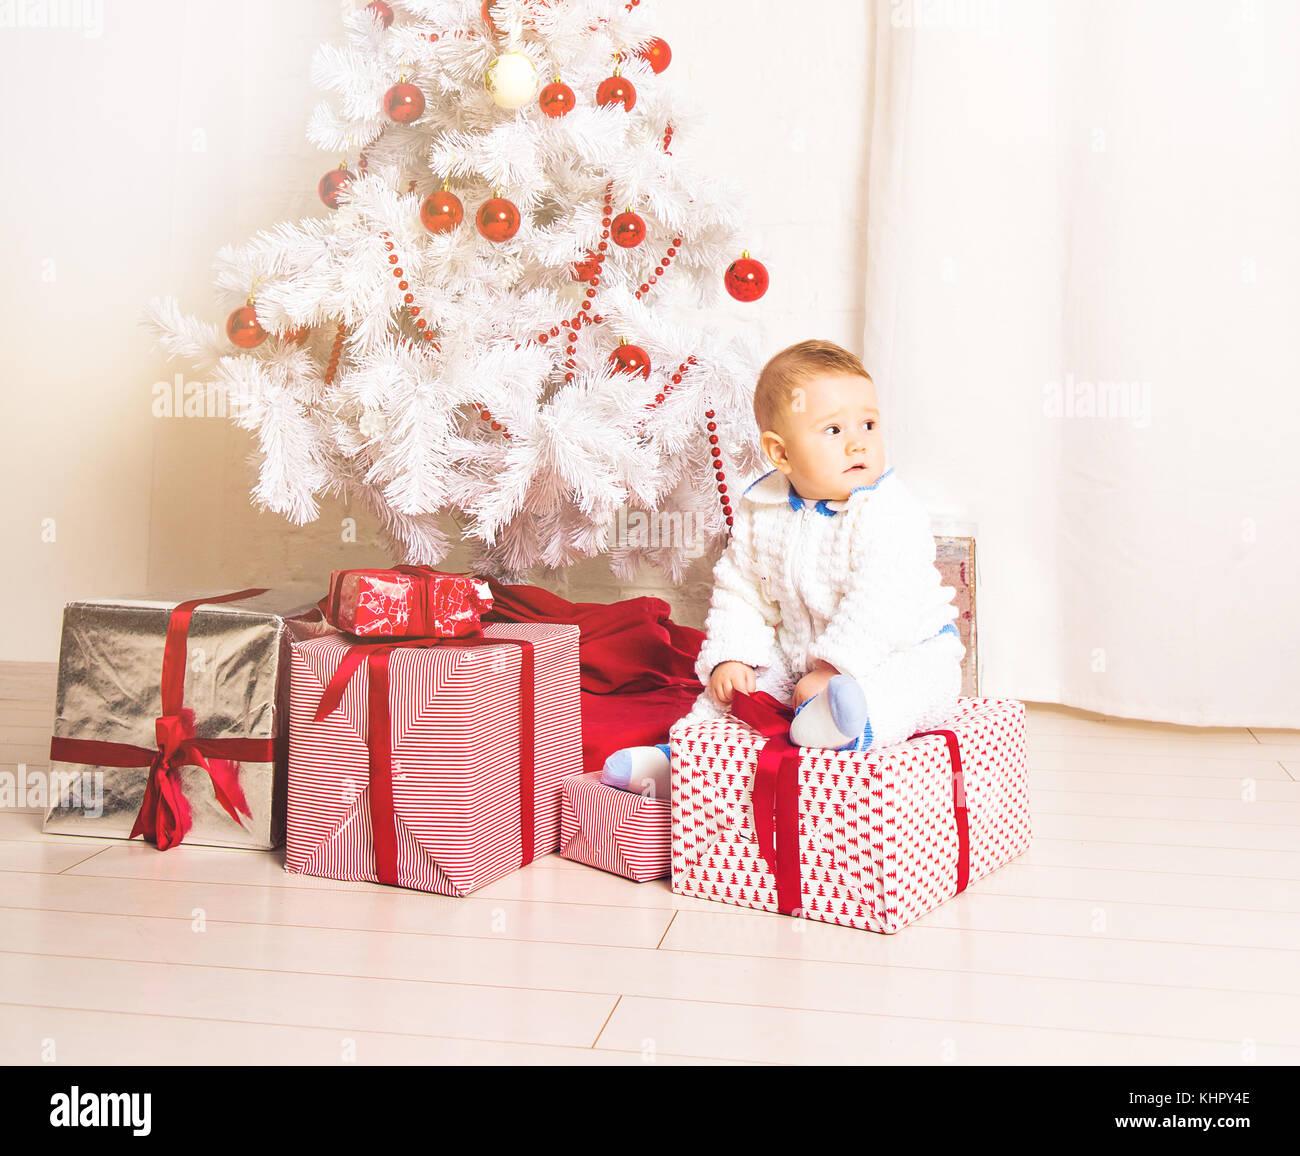 1 year old baby christmas gifts